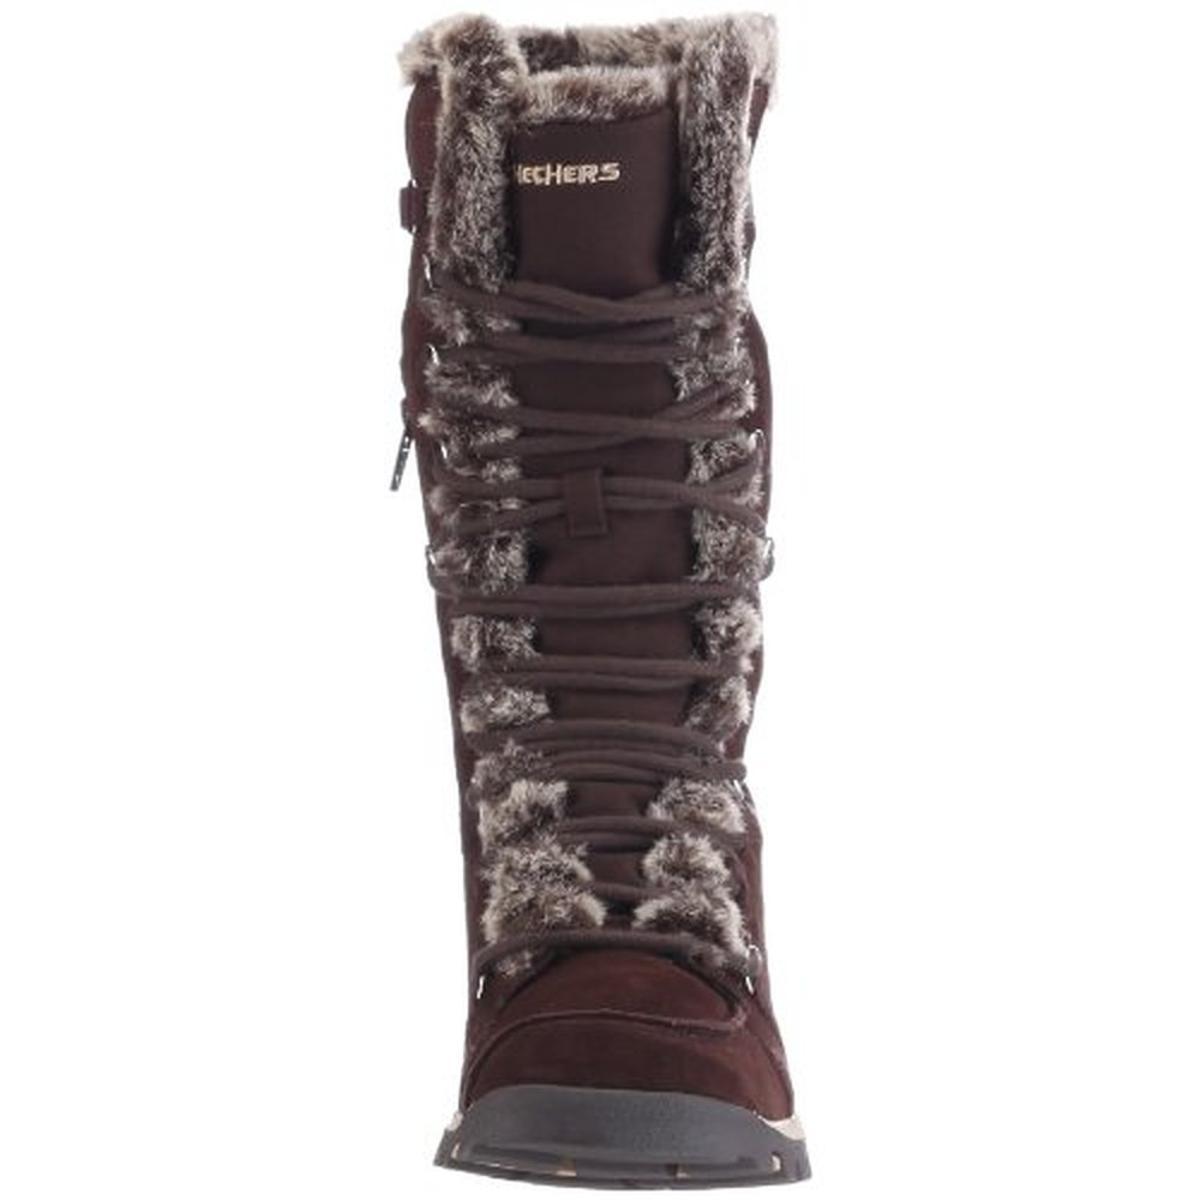 Skechers Grand Jams Unlimited Suede Faux Fur Winter Boots in Brown | Lyst